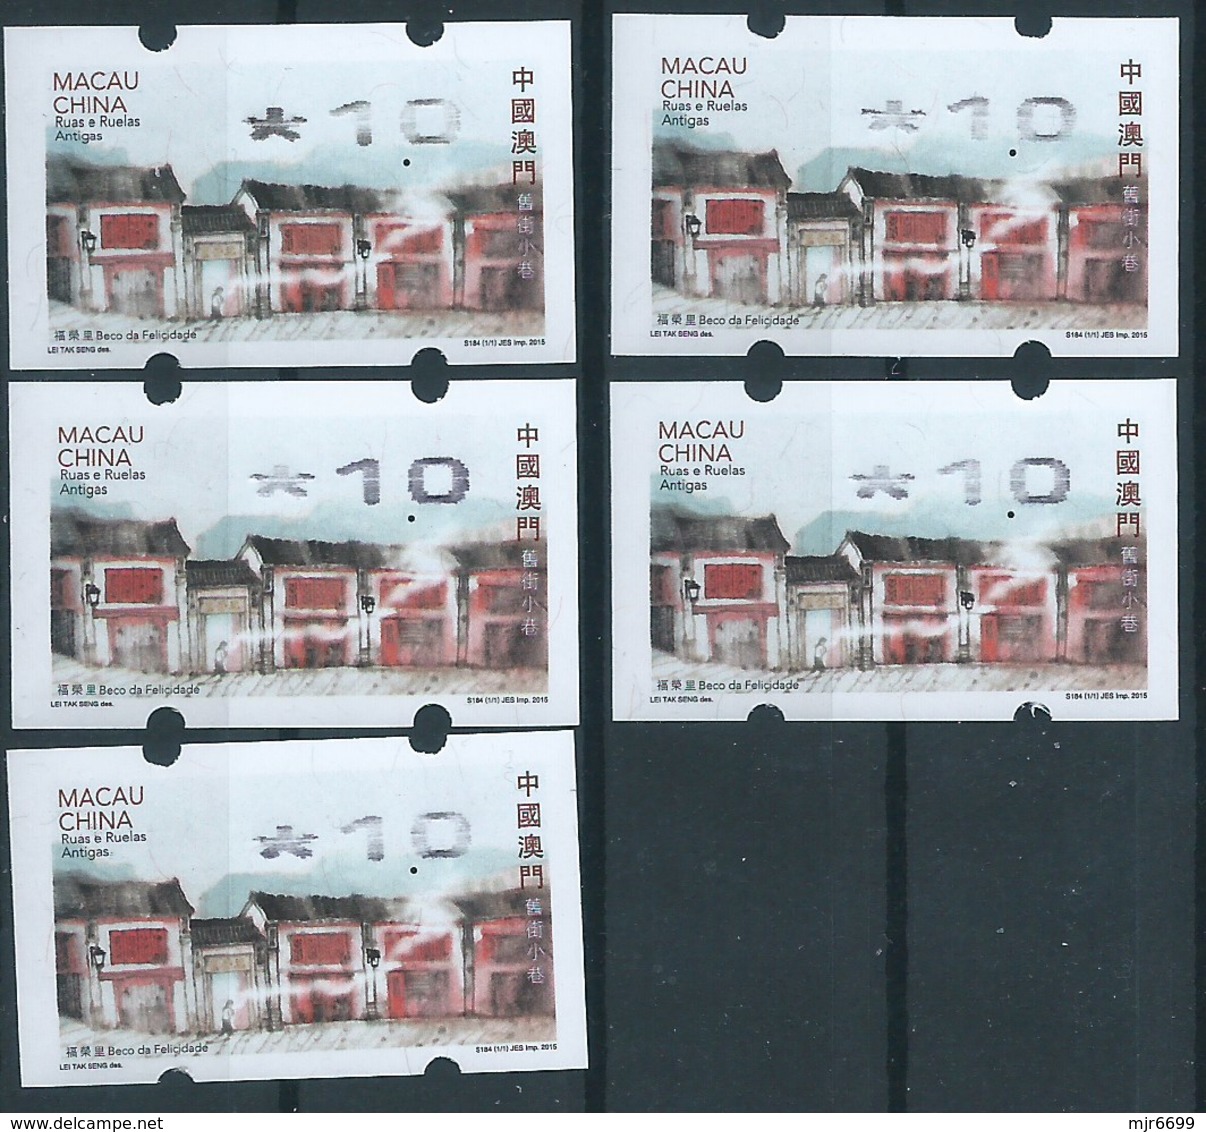 MACAU ATM LABELS STREETS AND ALLEYS NAGLER MACHINE 1 PATACA X 5 WITH BROKEN RIBBON PRINT - Automaten